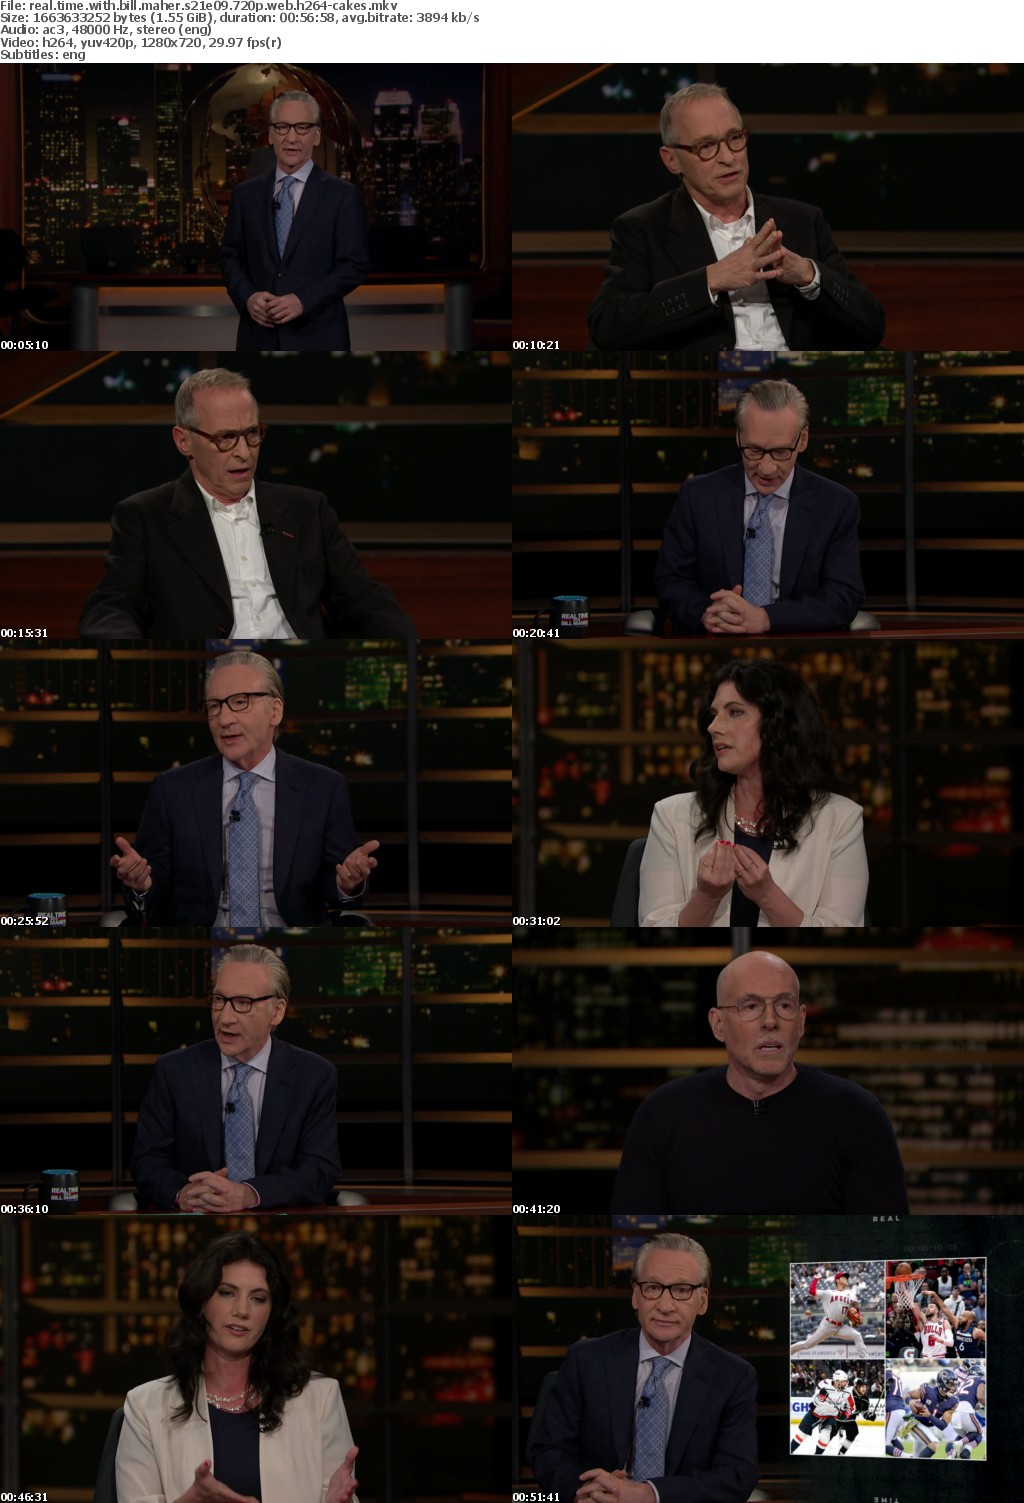 Real Time with Bill Maher S21E09 720p WEB H264-CAKES